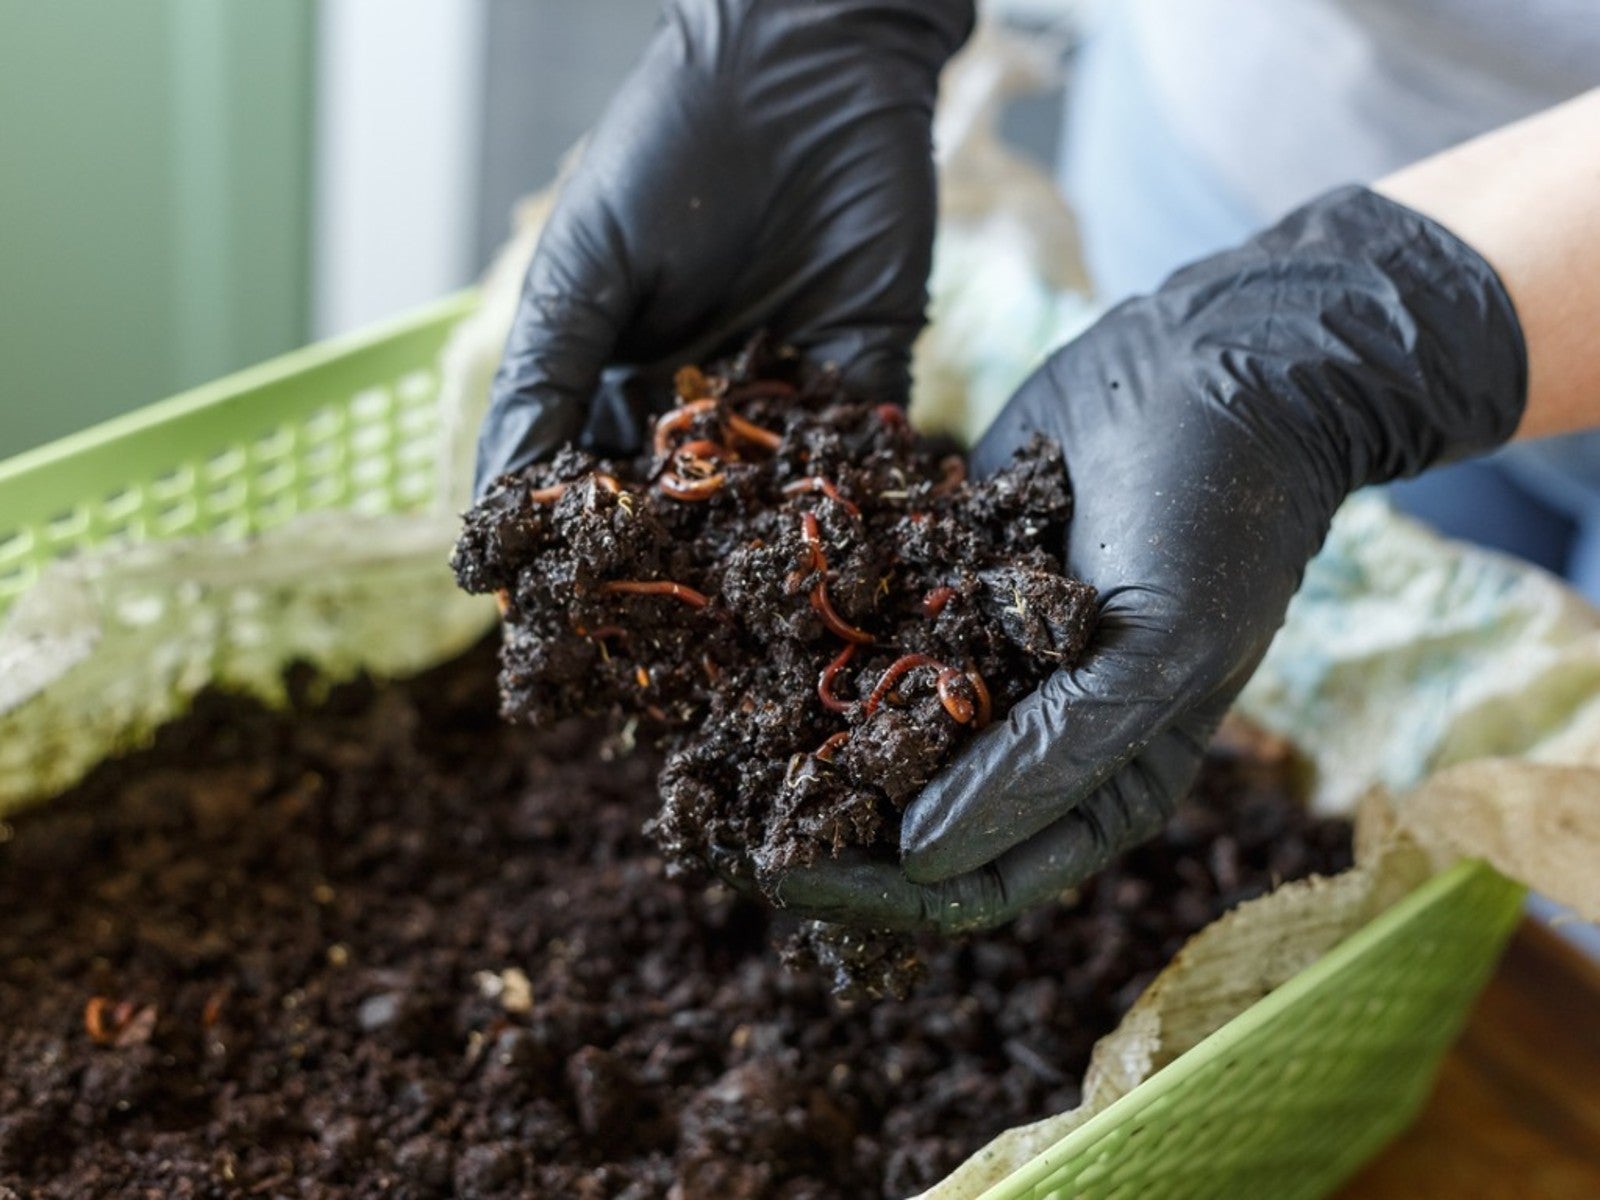 A gardener in black rubber gloves lifts several worms in soil out of a vermicompost bin